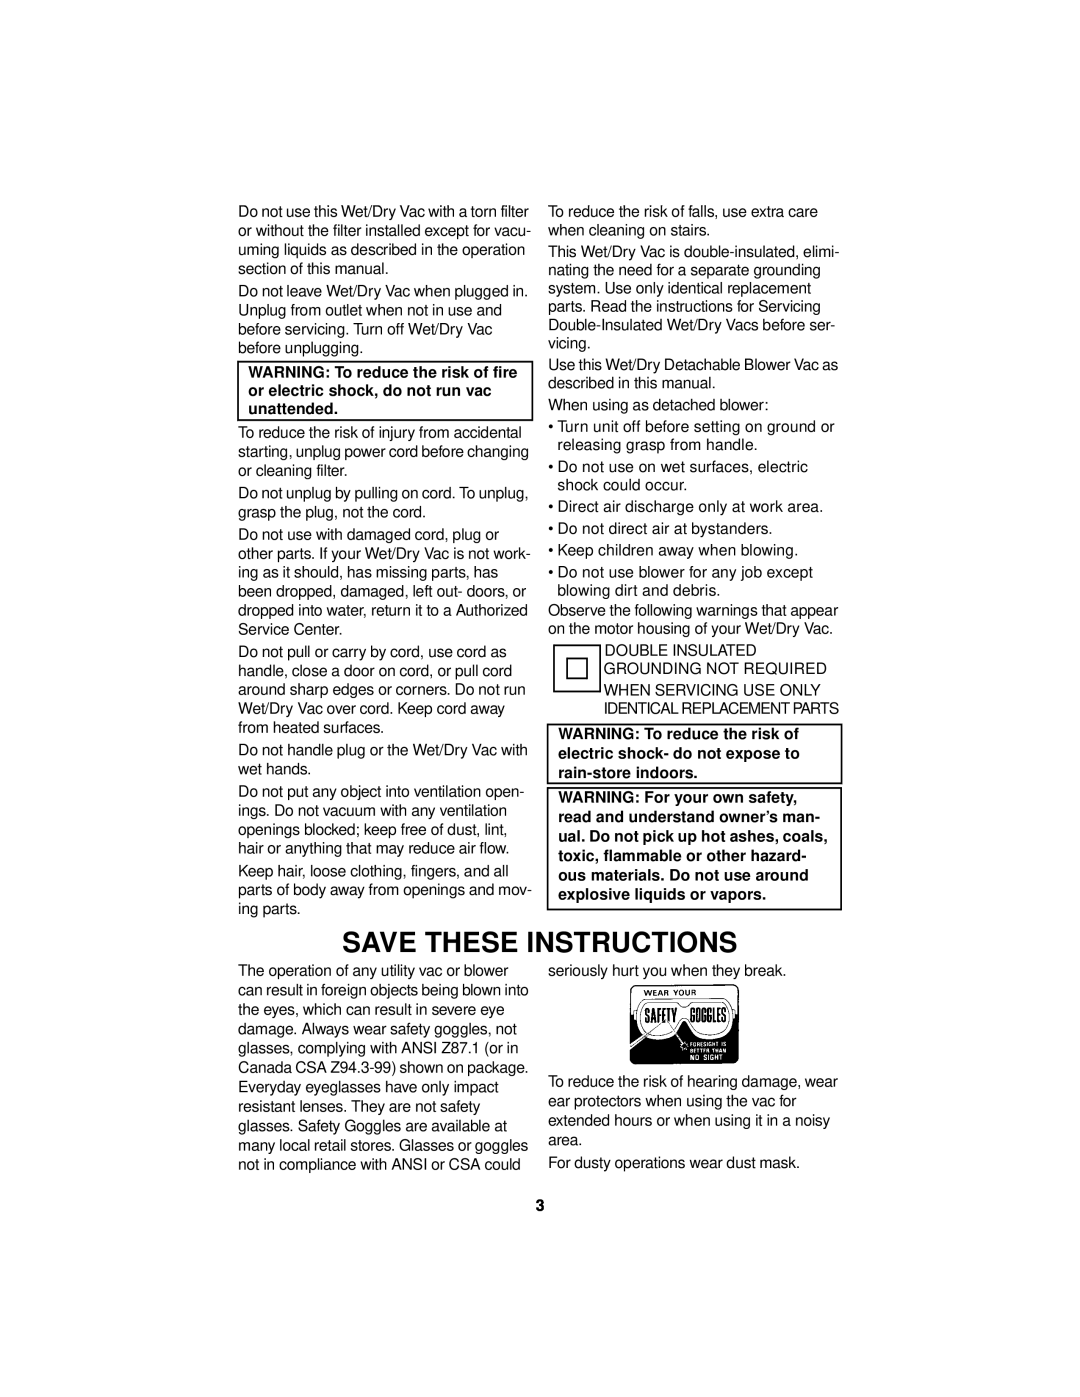 RIDGID WD1665 manual Save These Instructions 